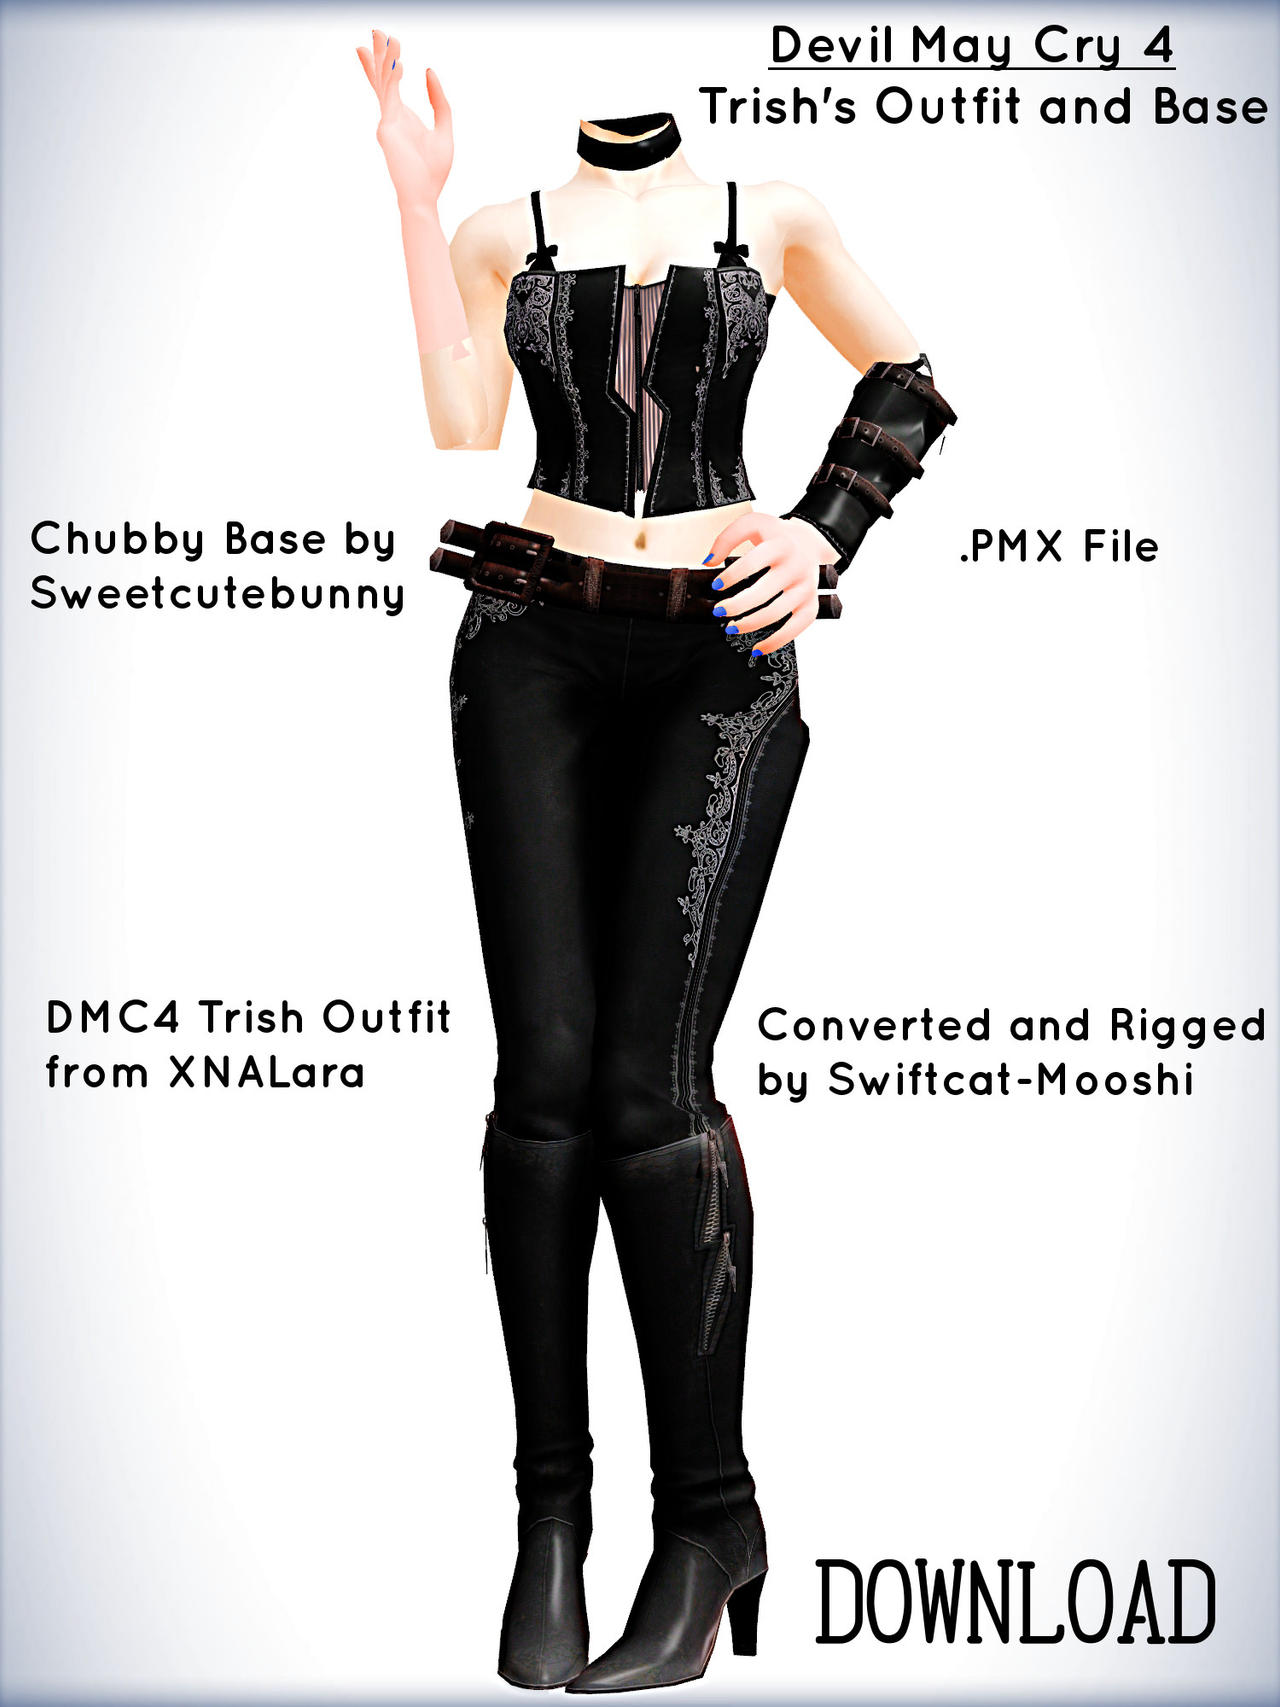 Devil May Cry 4 Trish Base Outfit DL by xXFrenchToastXx on DeviantArt